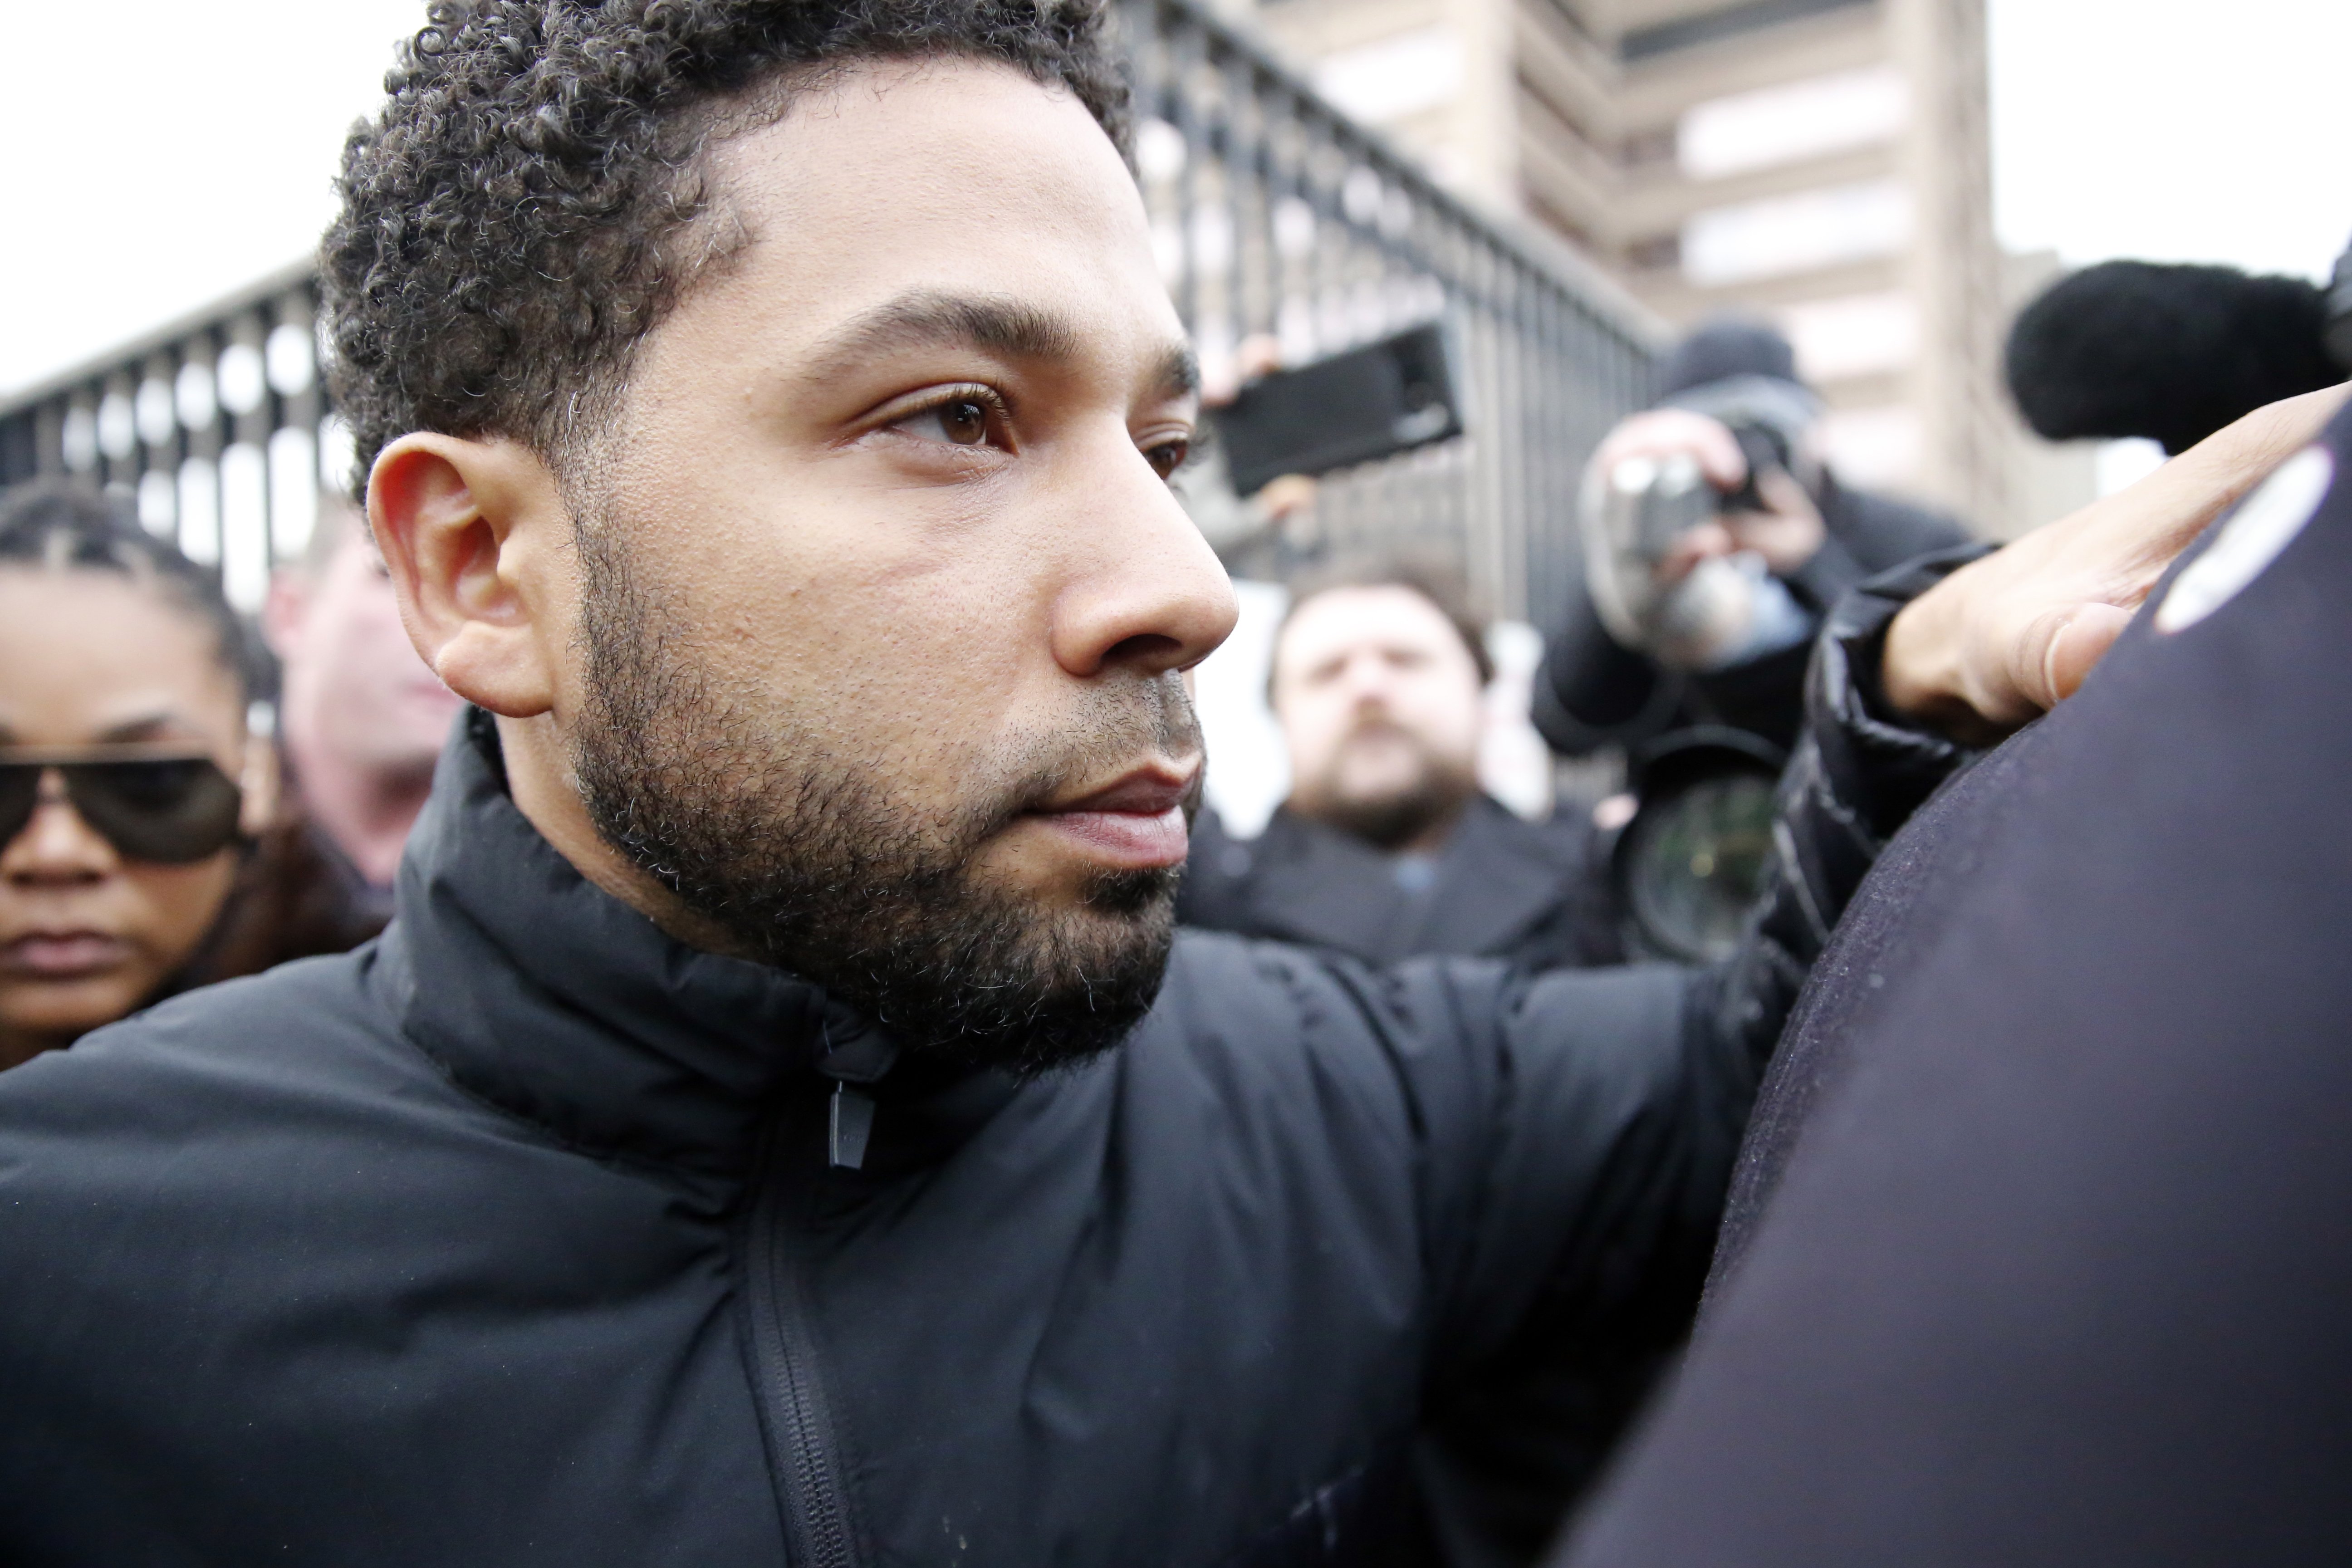 Jussie Smollett leaves Cook County jail after posting bond on February 21, 2019 in Chicago. | Photo: GettyImages